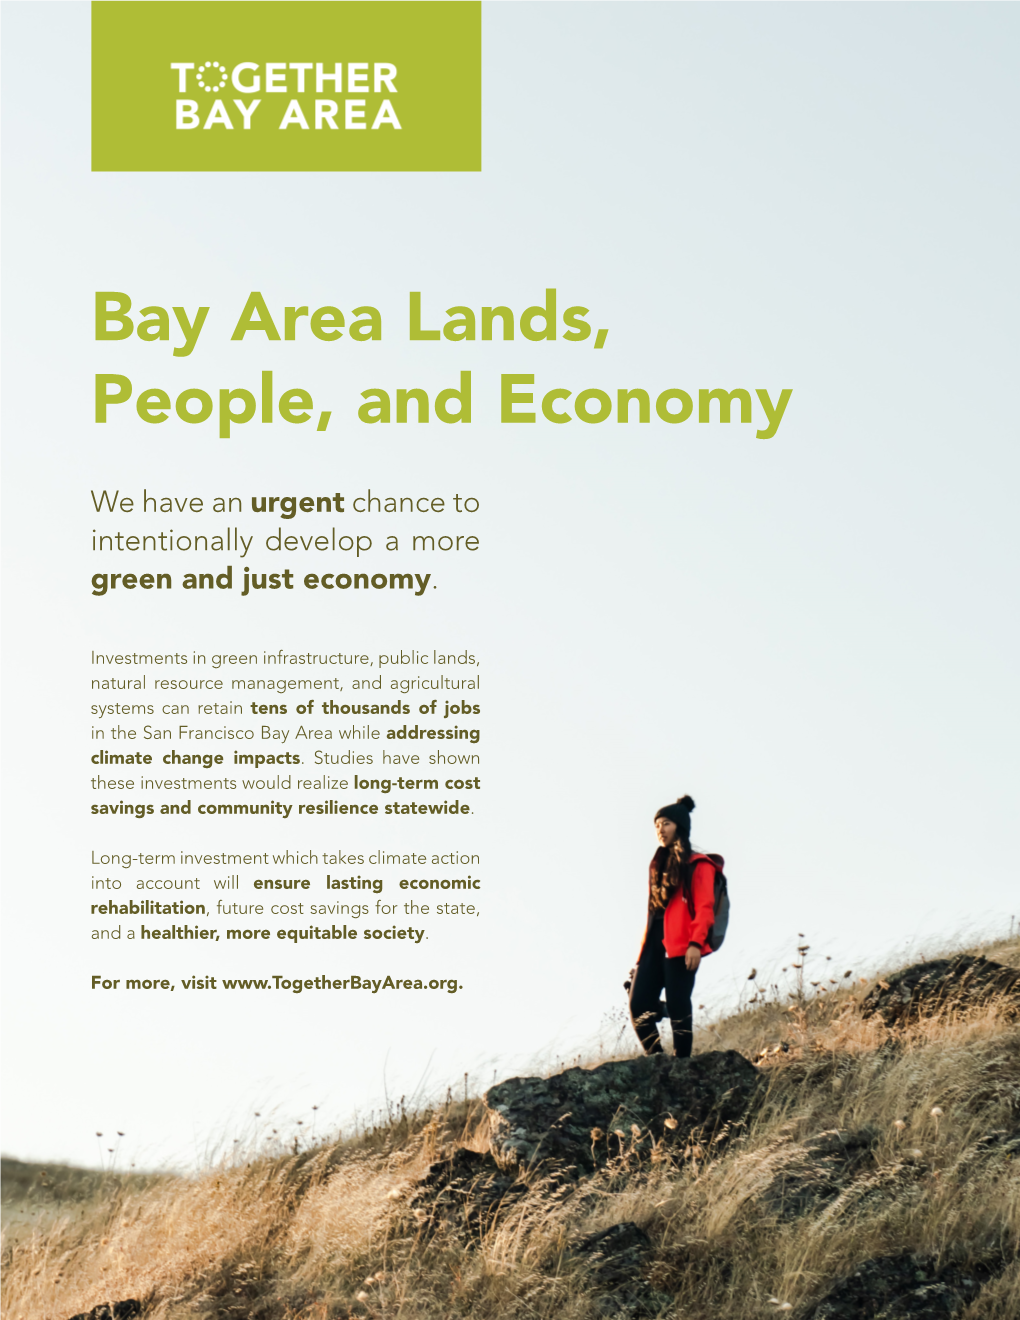 Bay Area Lands, People, and Economy